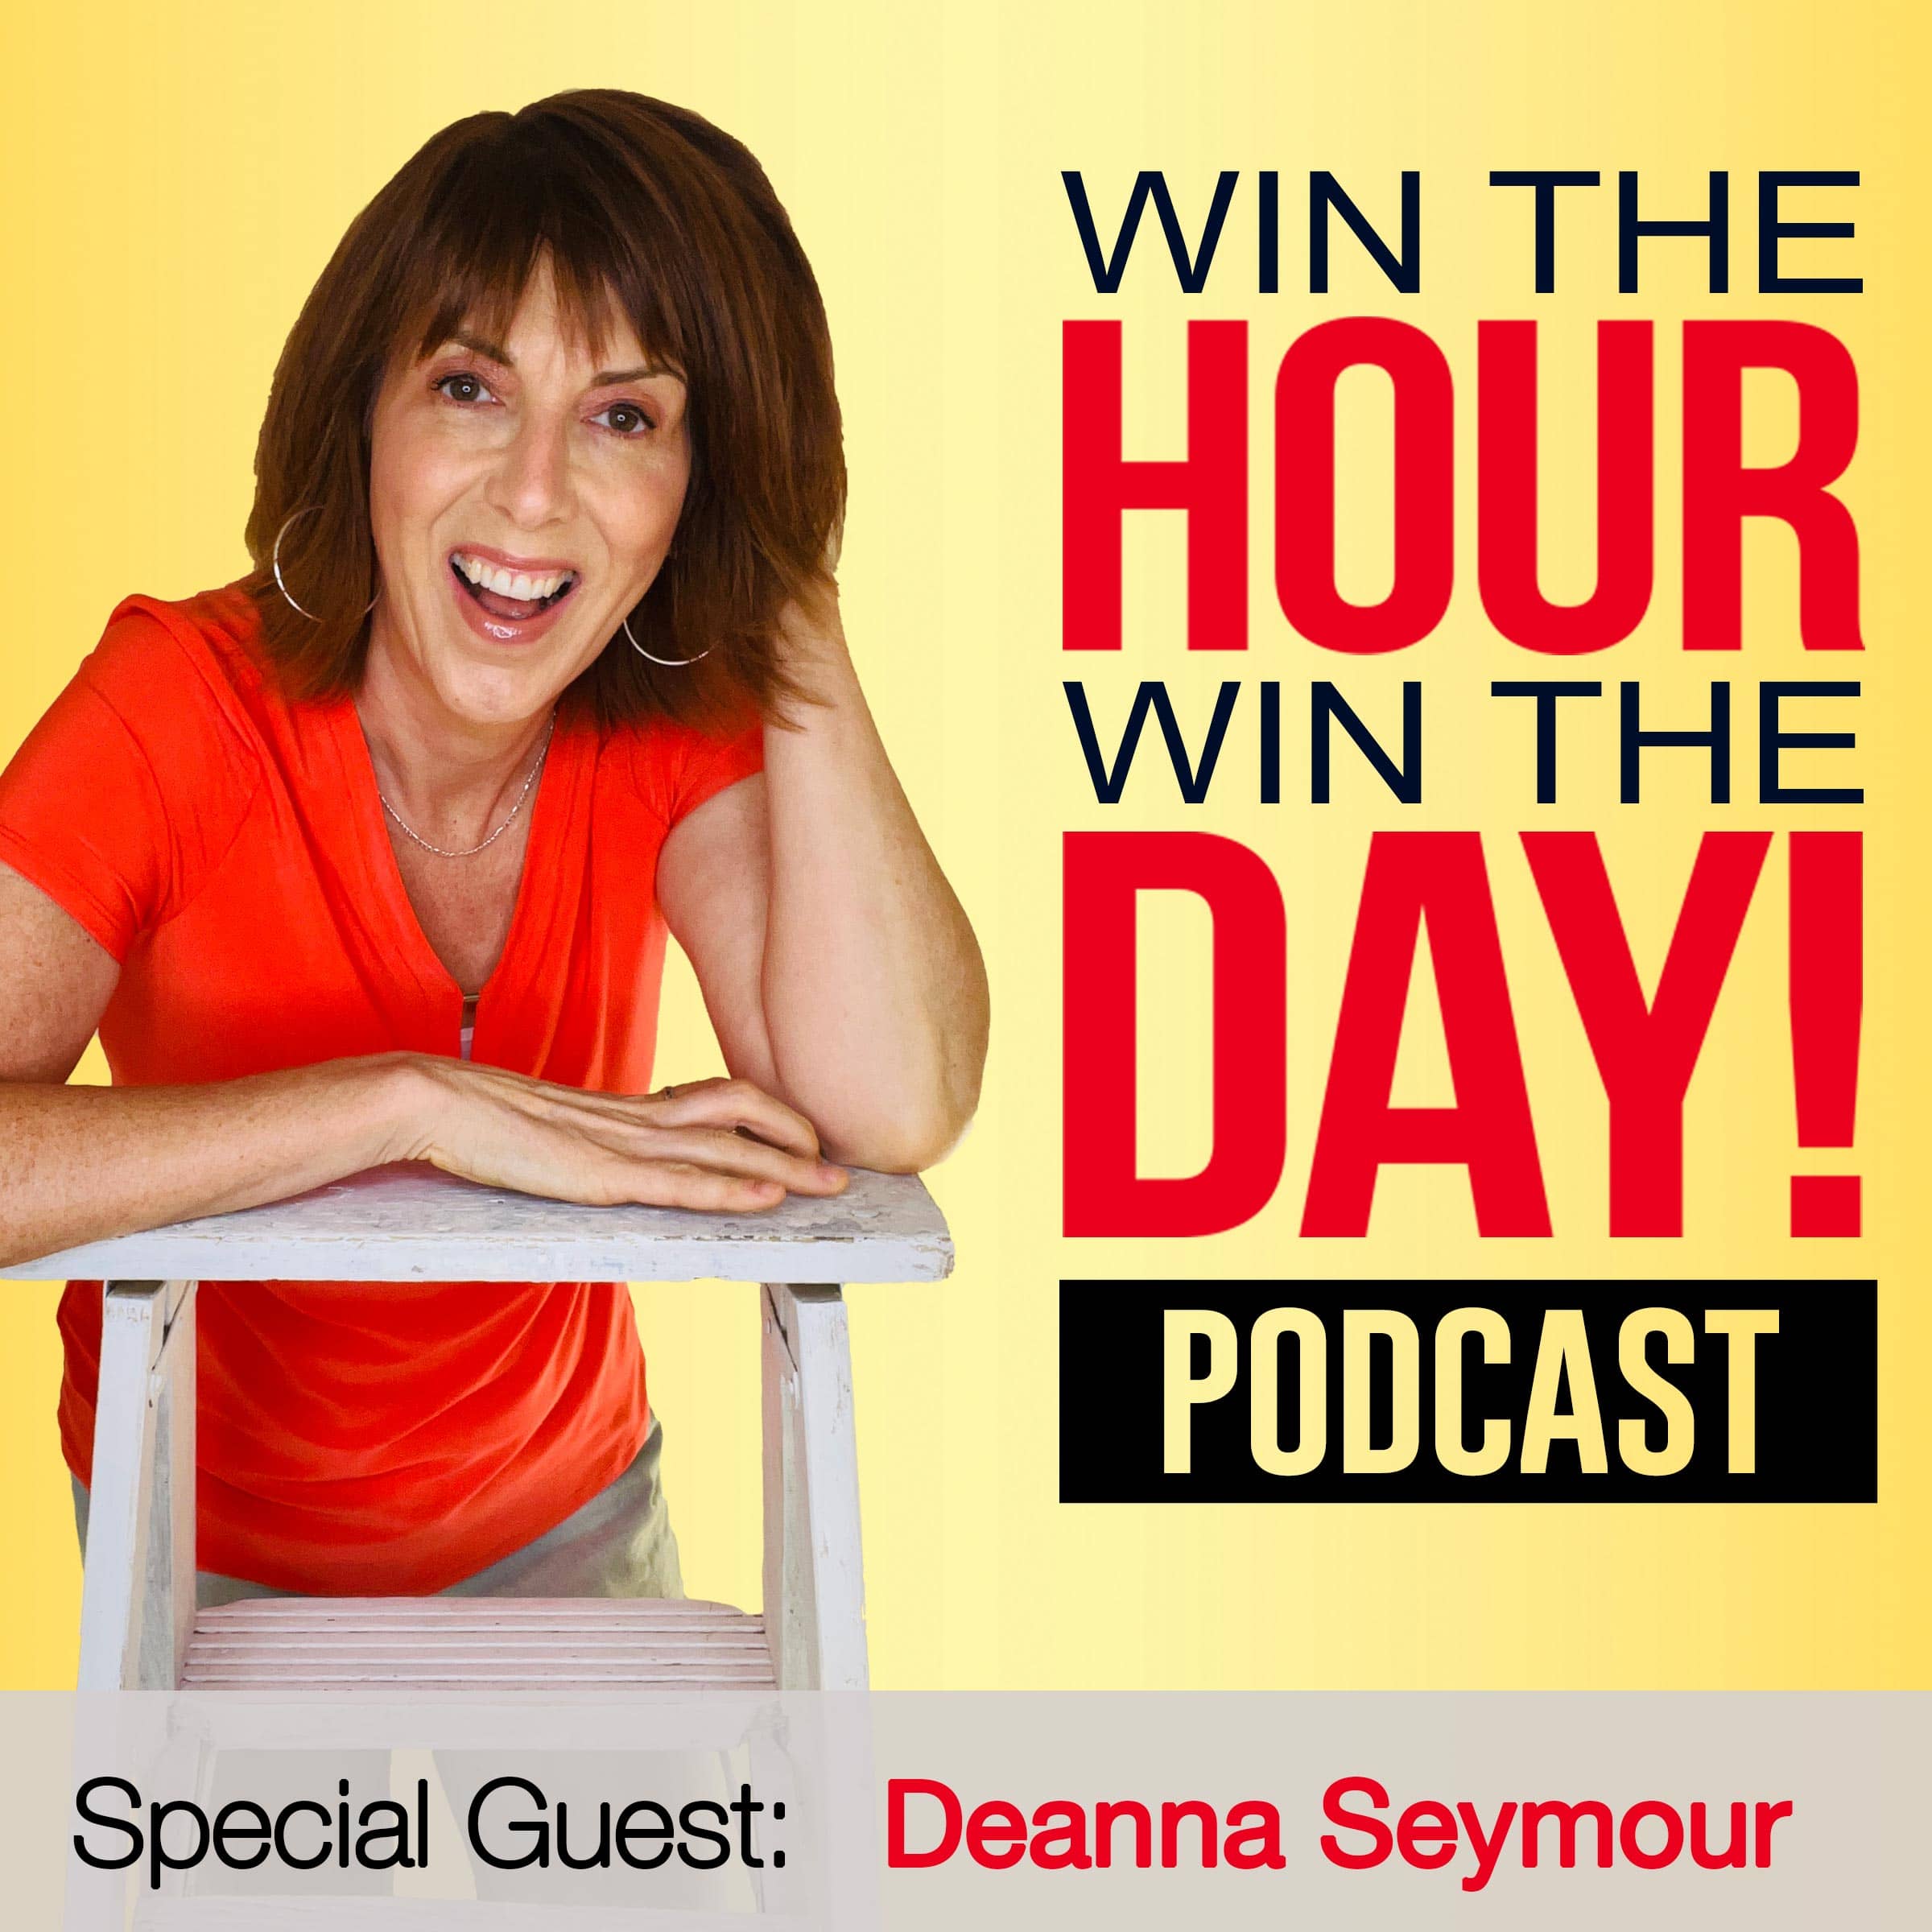 Use GIFs To Market Your Business! with Deanna Seymour